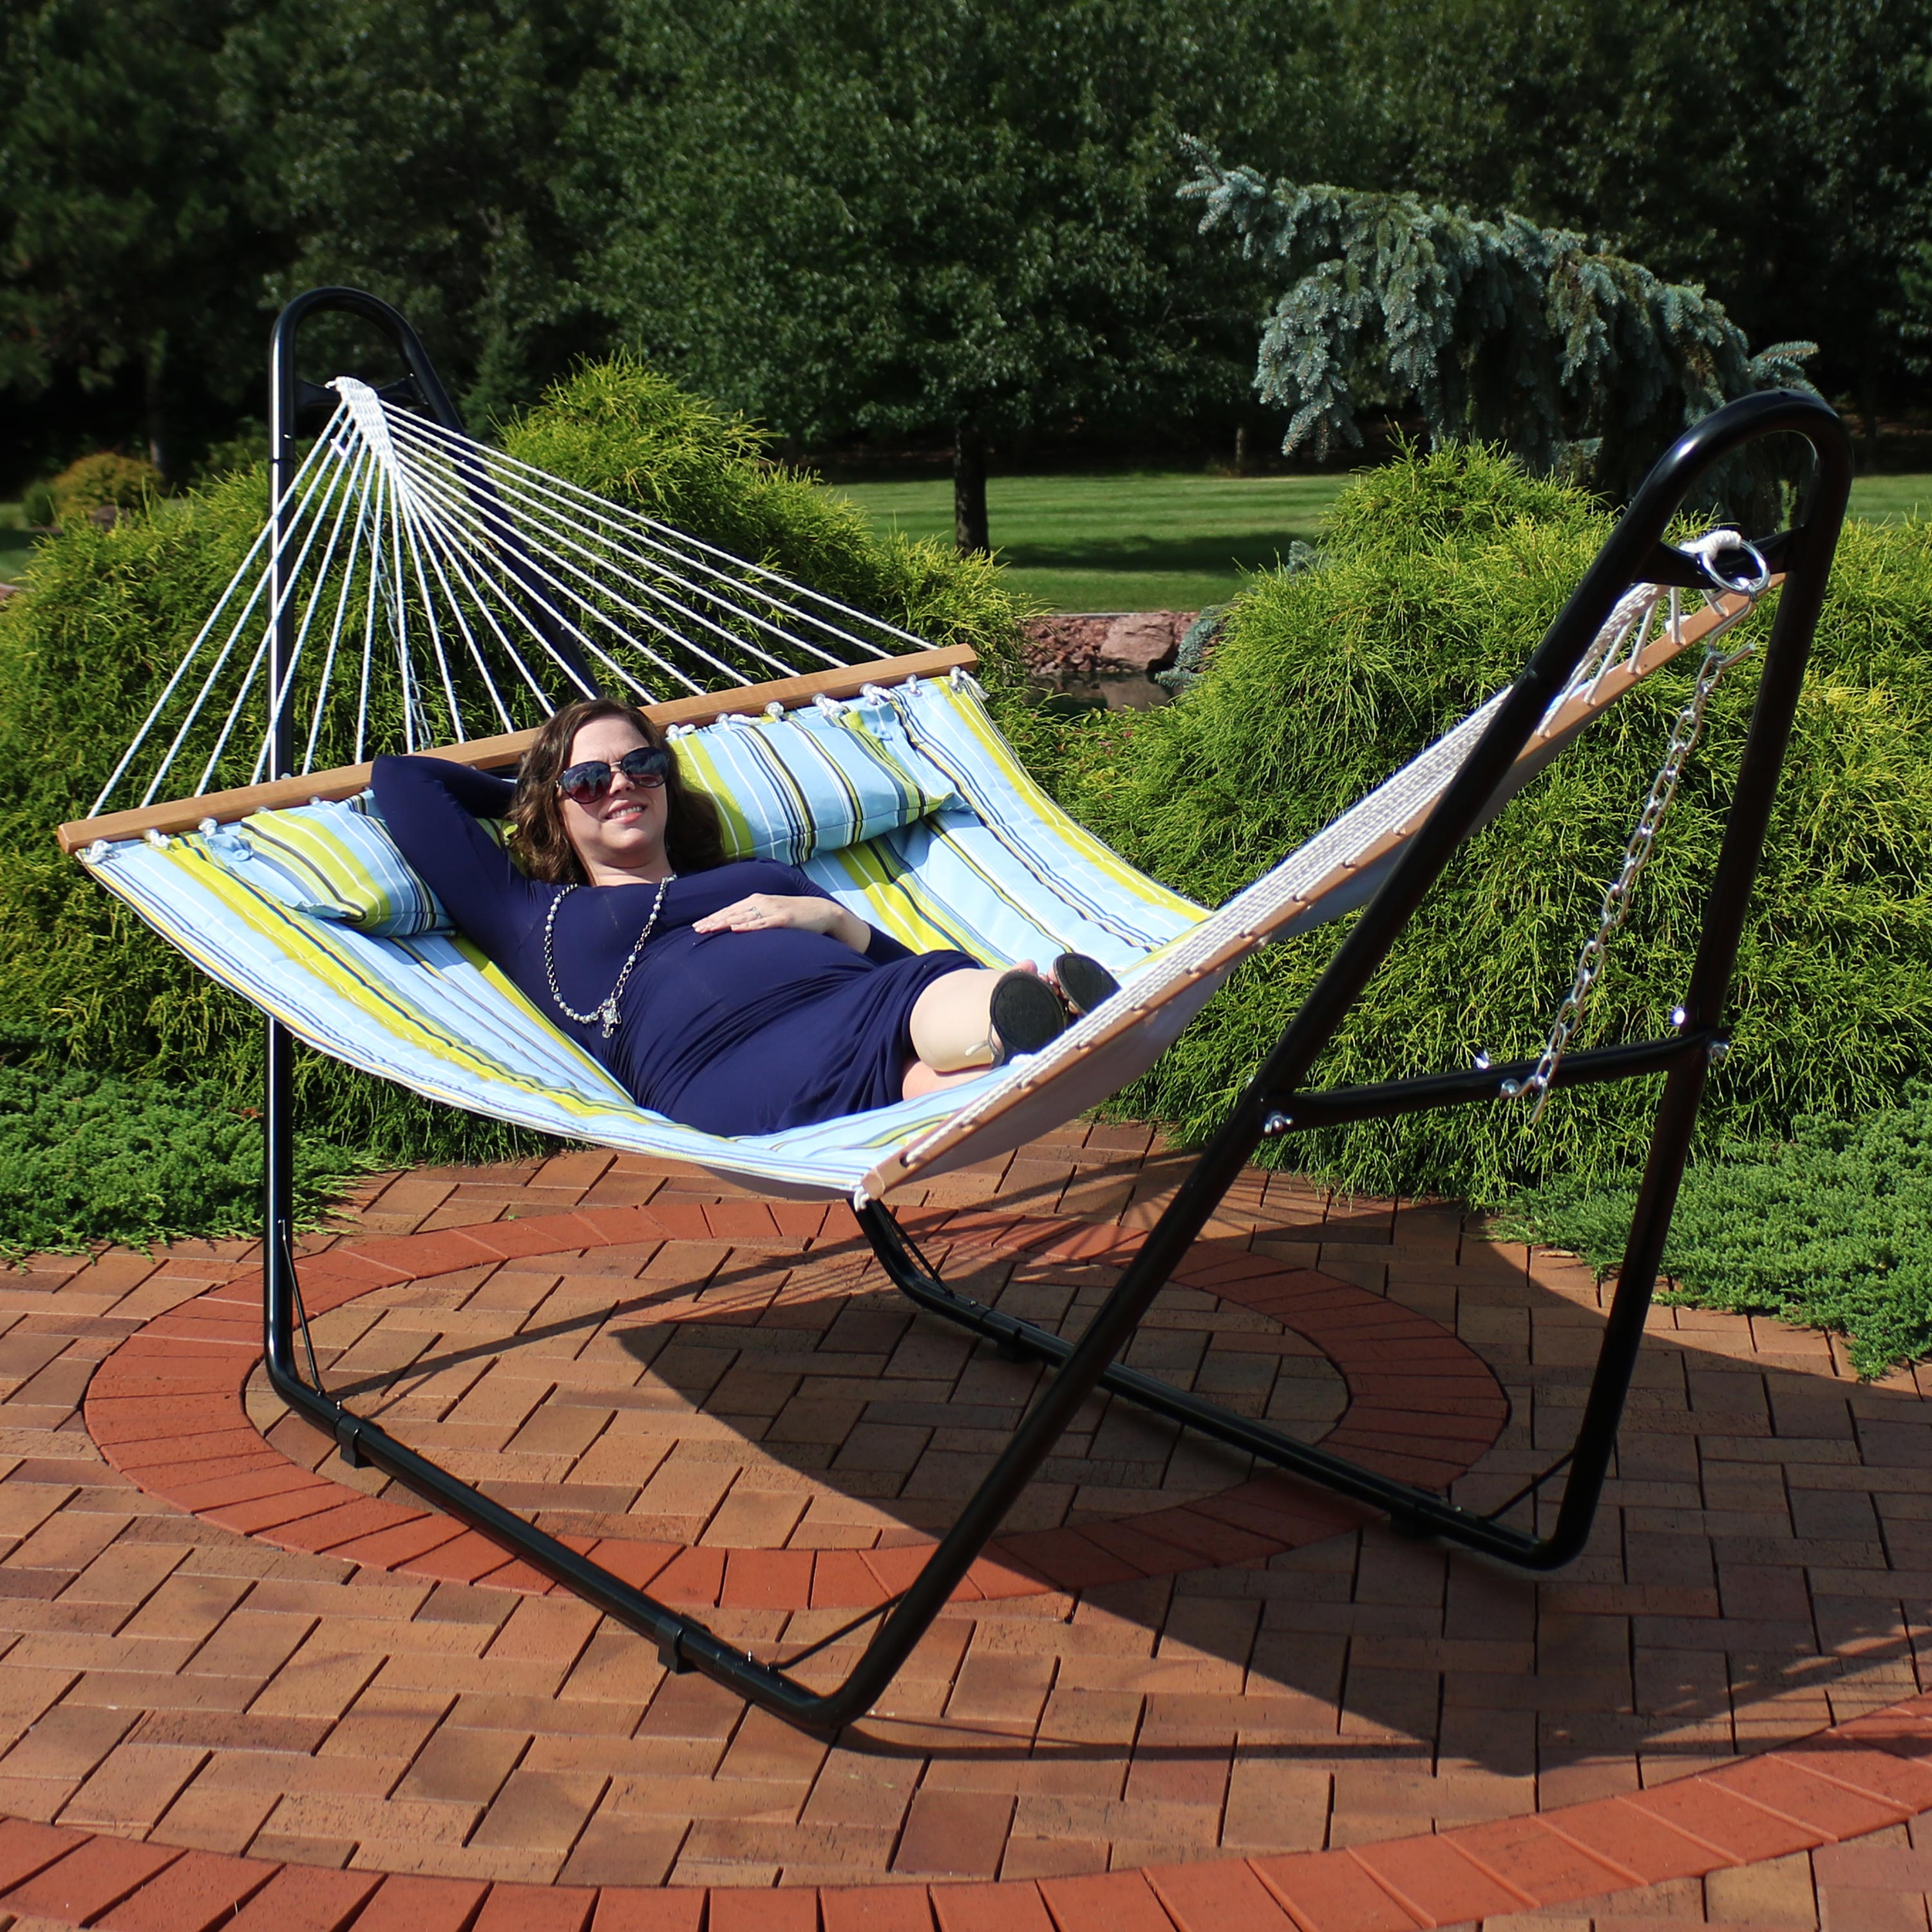 Sunnydaze Blue and Green 2-Person Outdoor Heavy-Duty 450-Pound Capacity Quilted Fabric Hammock with Spreader Bars and Black Universal Multi-Use Heavy-